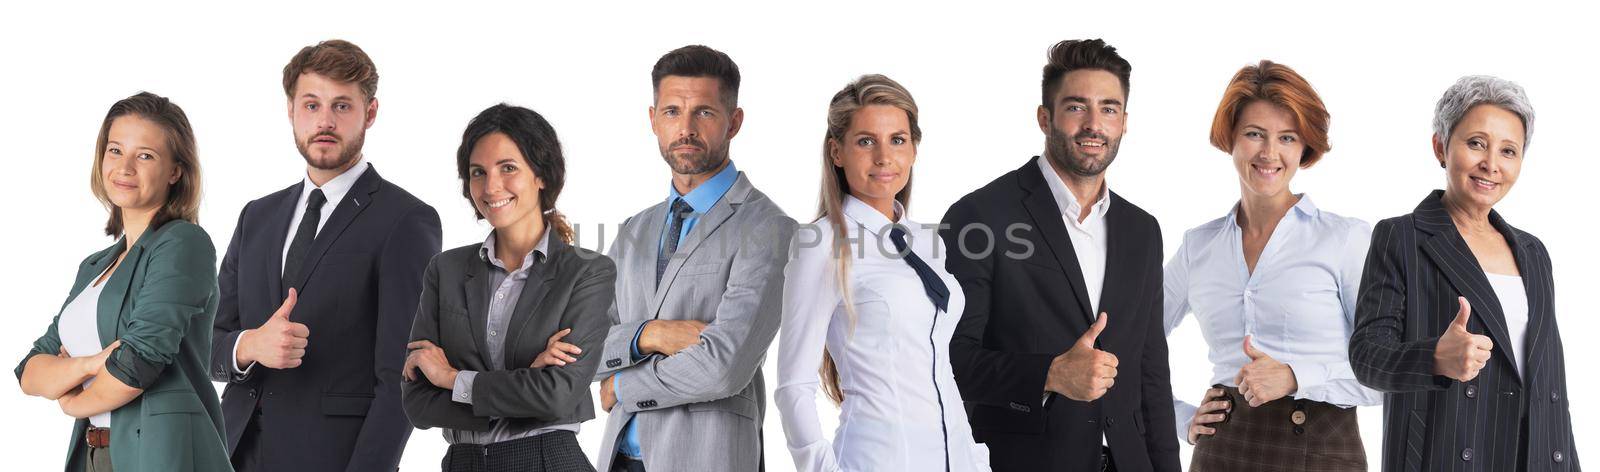 Business people team on white by ALotOfPeople